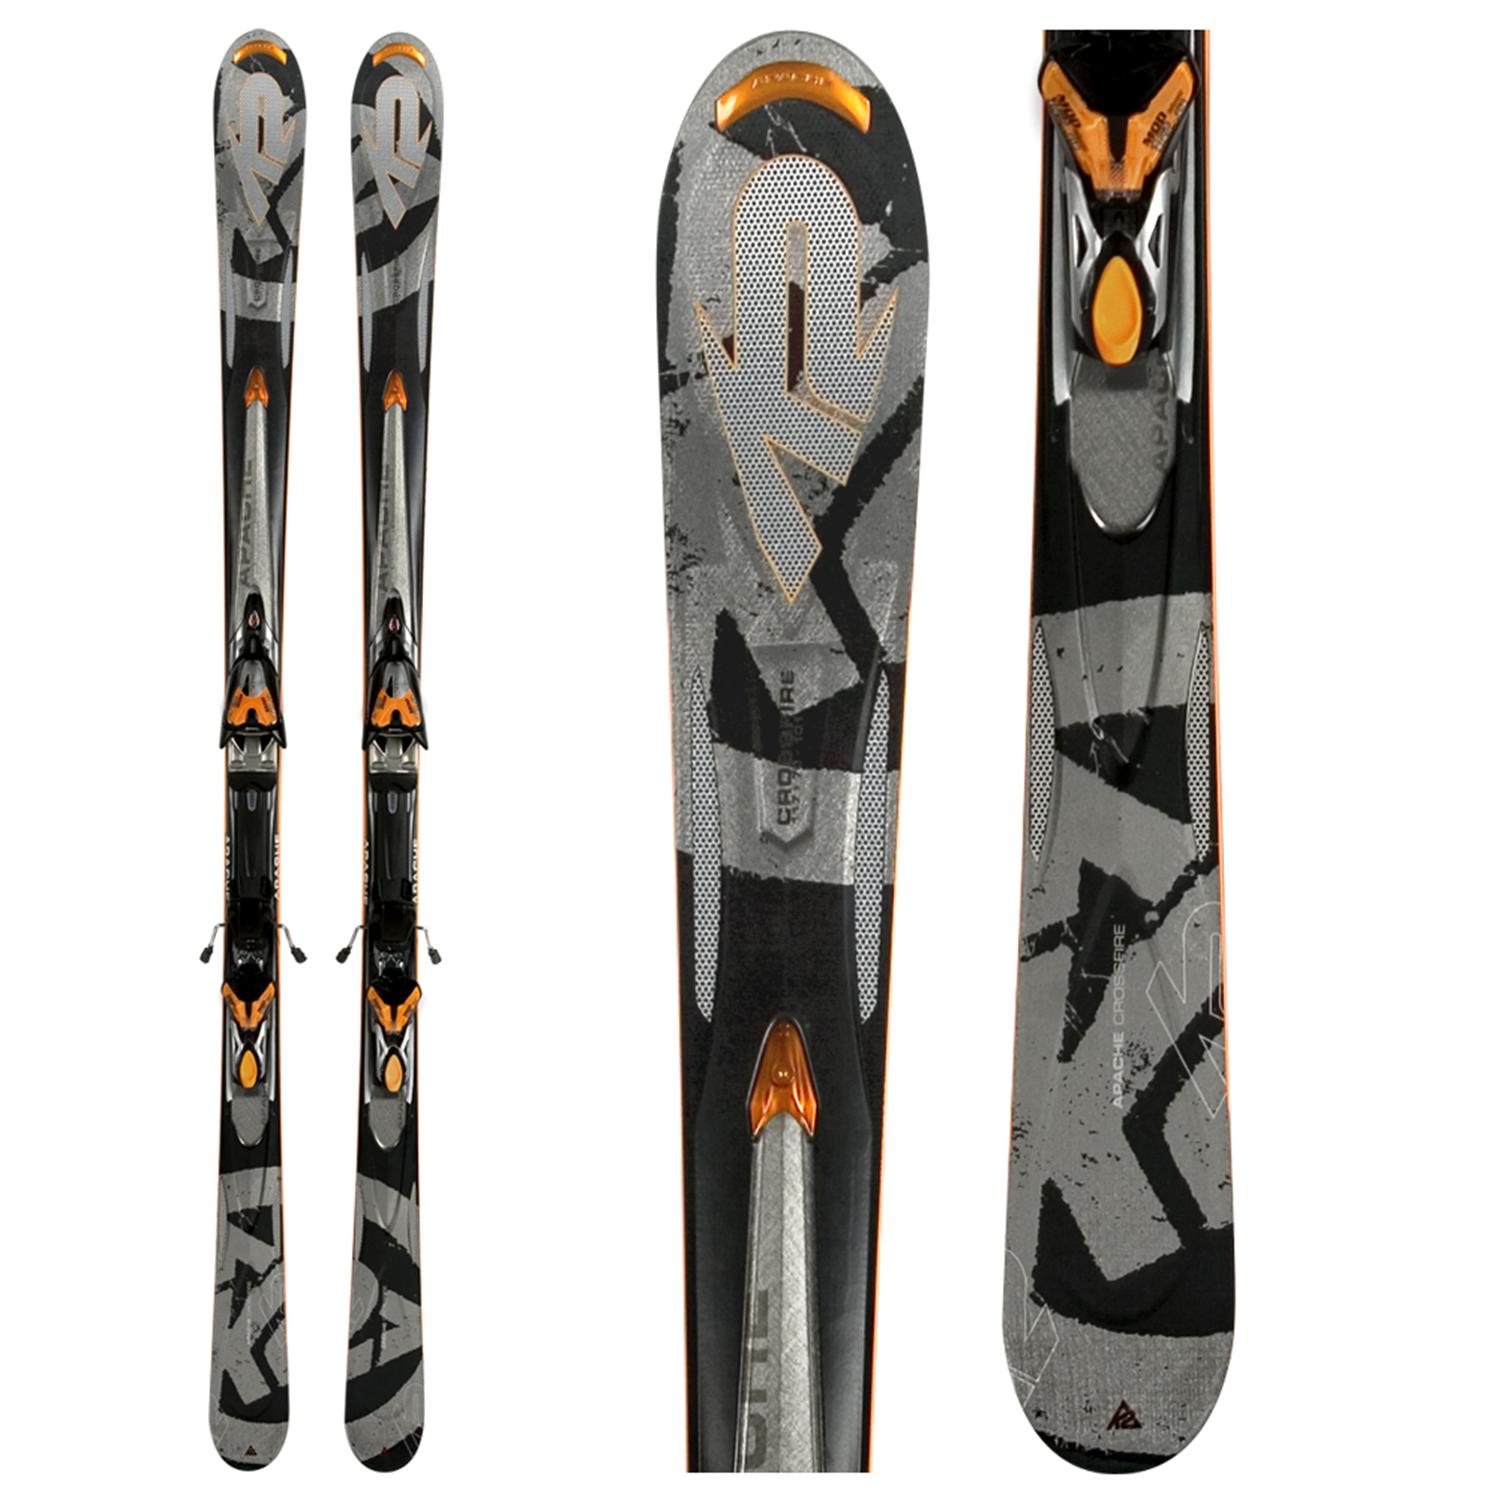 How To Install Marker Bindings On K2 Skis